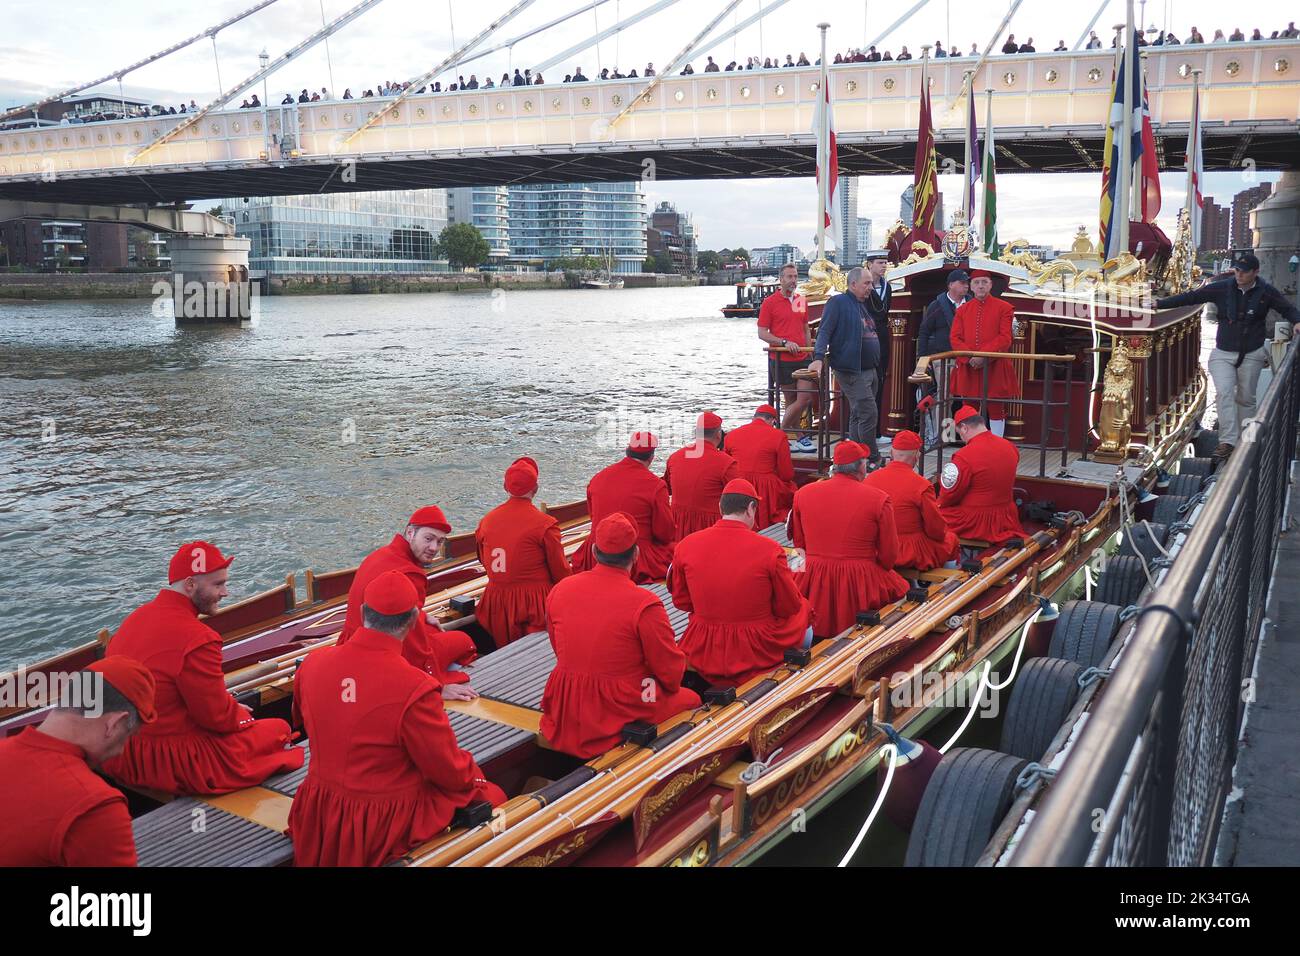 London, UK. 24th Sep, 2022. The crew of Royal Row Barge “Gloriana” prepare to take part in the Thames Flotilla -150 illuminated boats sailing down the Thames in support of the RNLI. Credit: Brian Minkoff /Alamy Live News Stock Photo